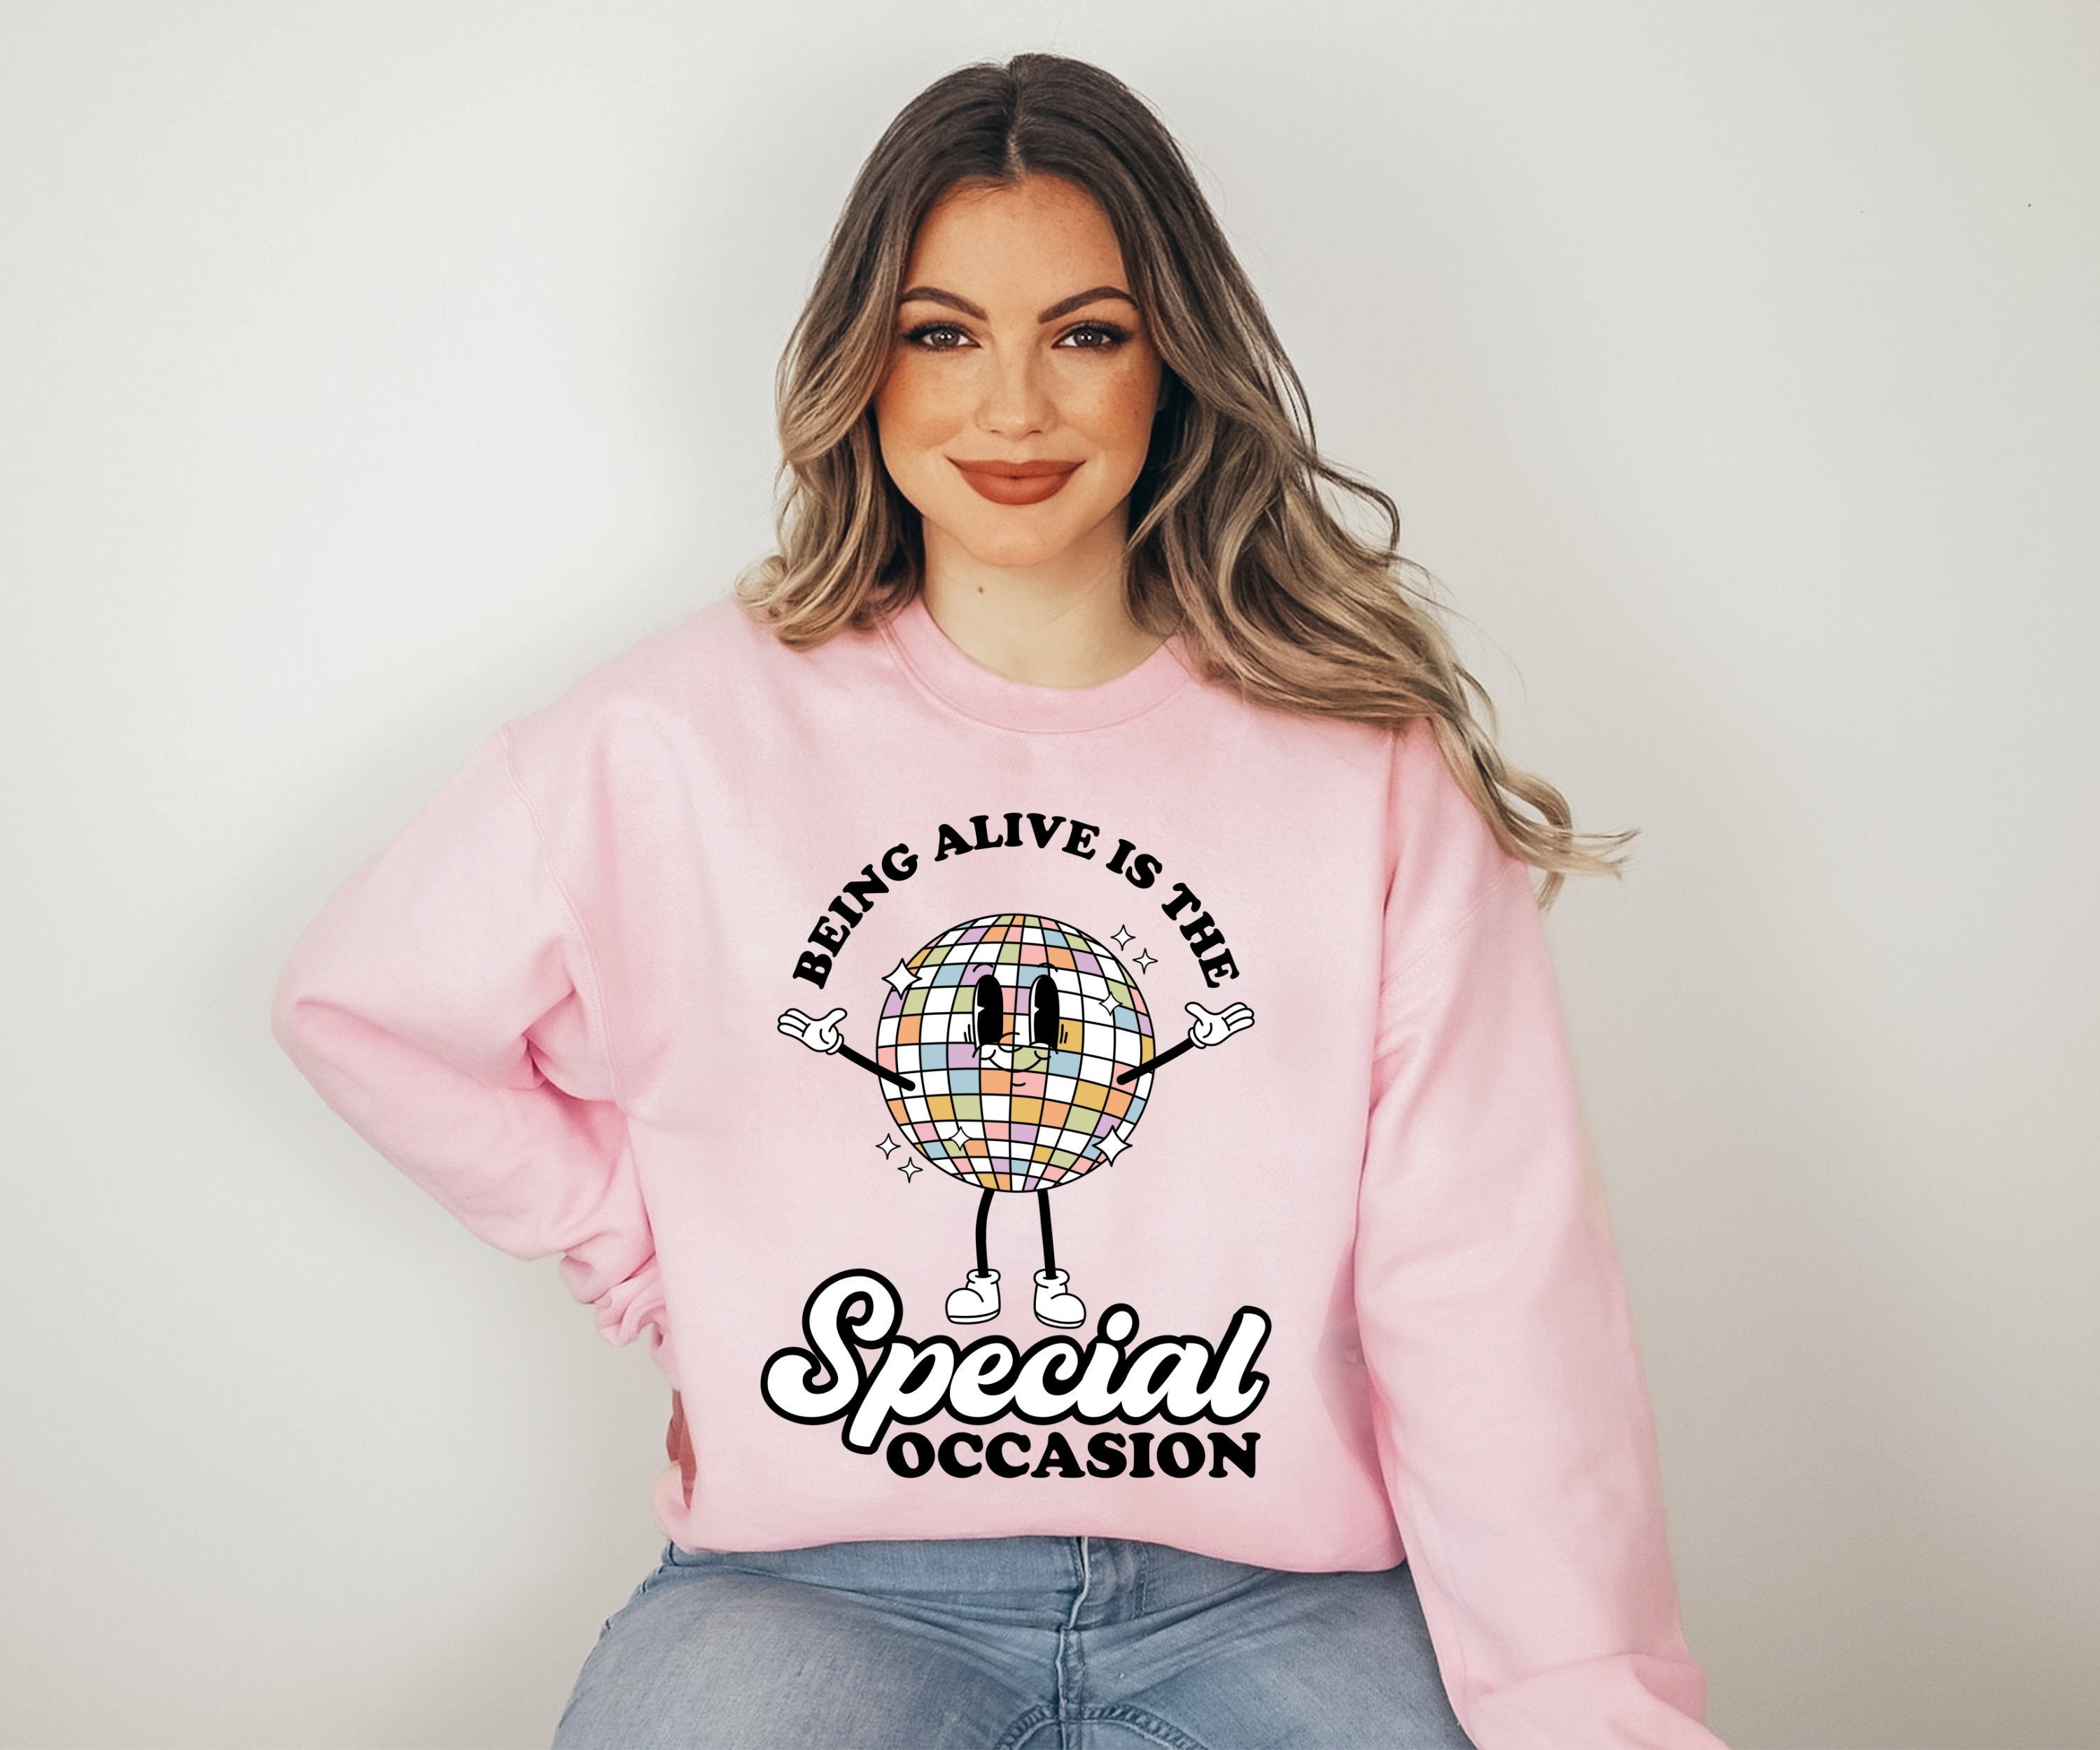 Buy Good Vibes Sweatshirt, Motivational T-shirt, Trendy Oversized  Sweatshirt, Good Vibes Shirt, Being Alive is the Special Occasion  Sweatshirt Online in India - Etsy